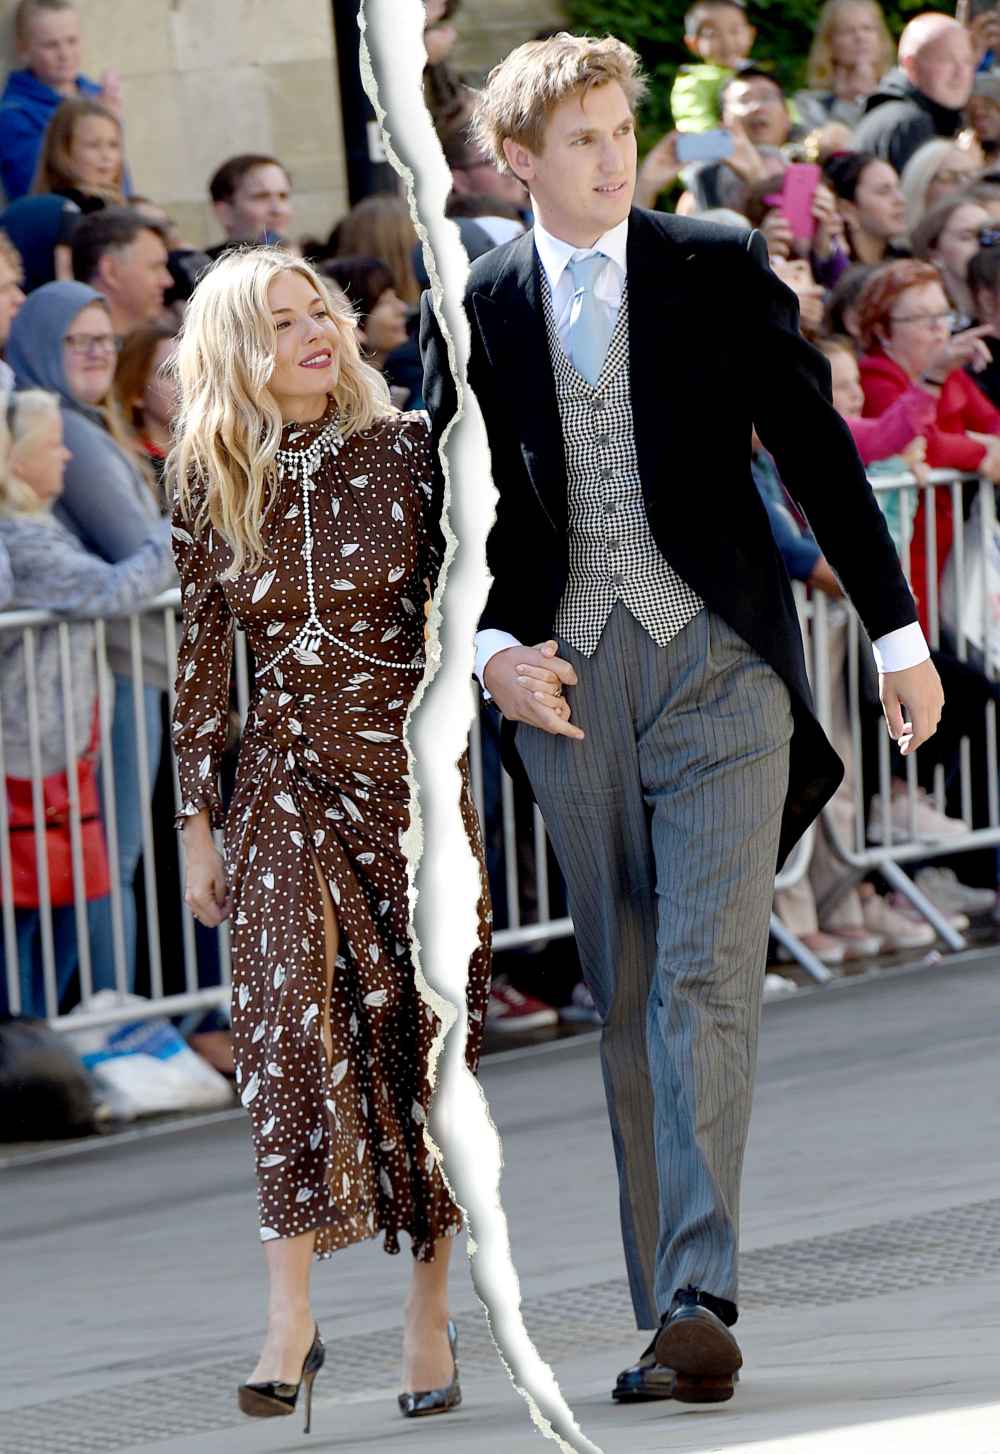 Sienna Miller Splits From Fiance Lucas Zwirner After Over 1 Year Together